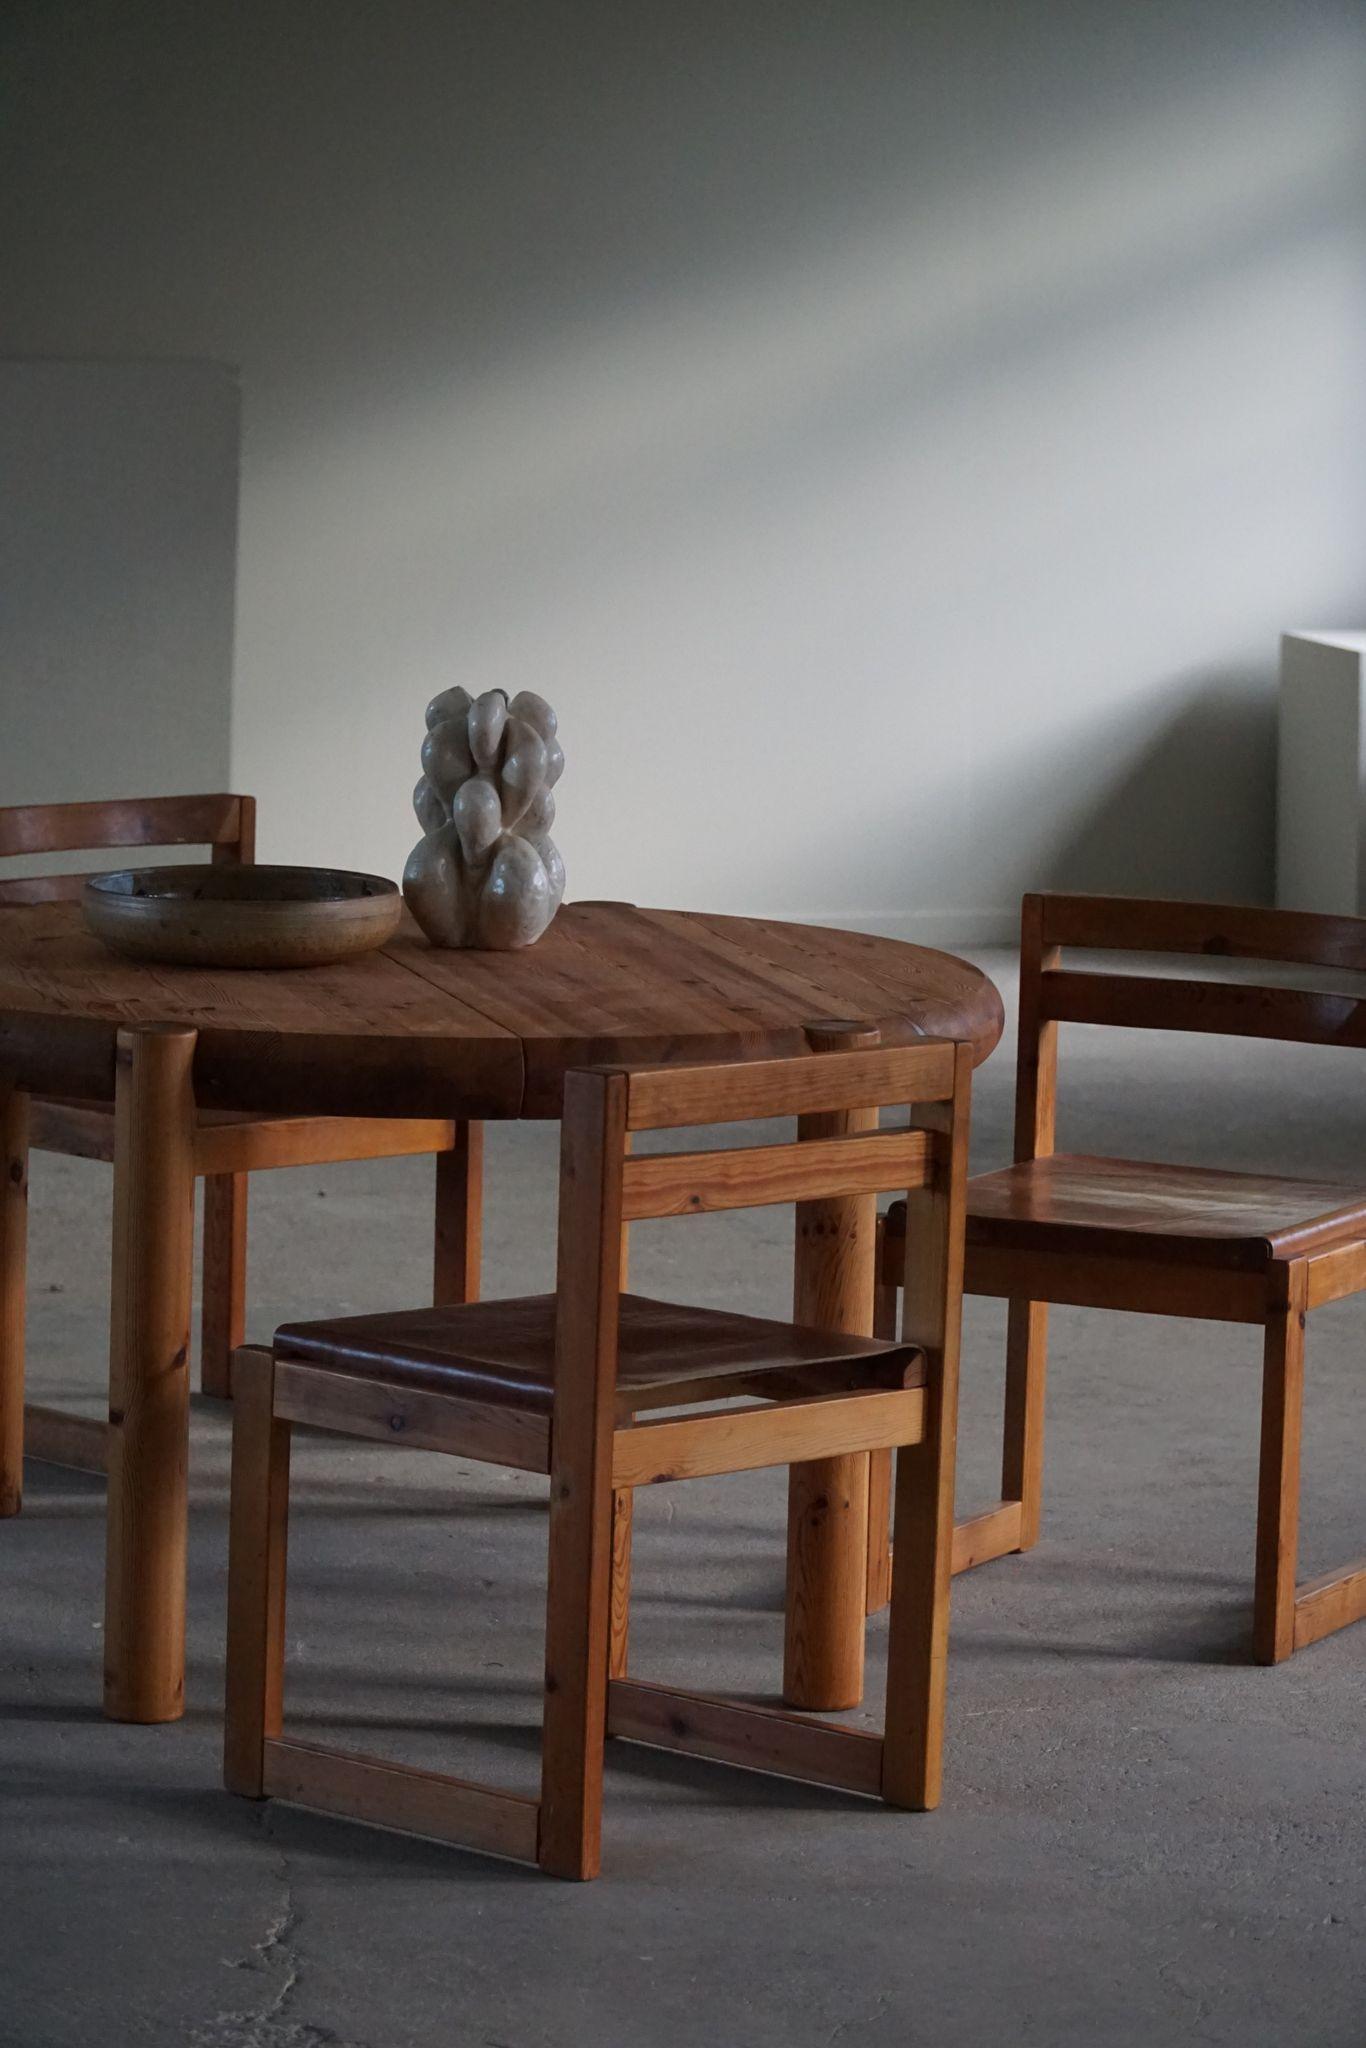 Brutalist Set of 4, Danish Modern Dining Chairs in Pine and Leather, by Knud Færch, 1970s For Sale